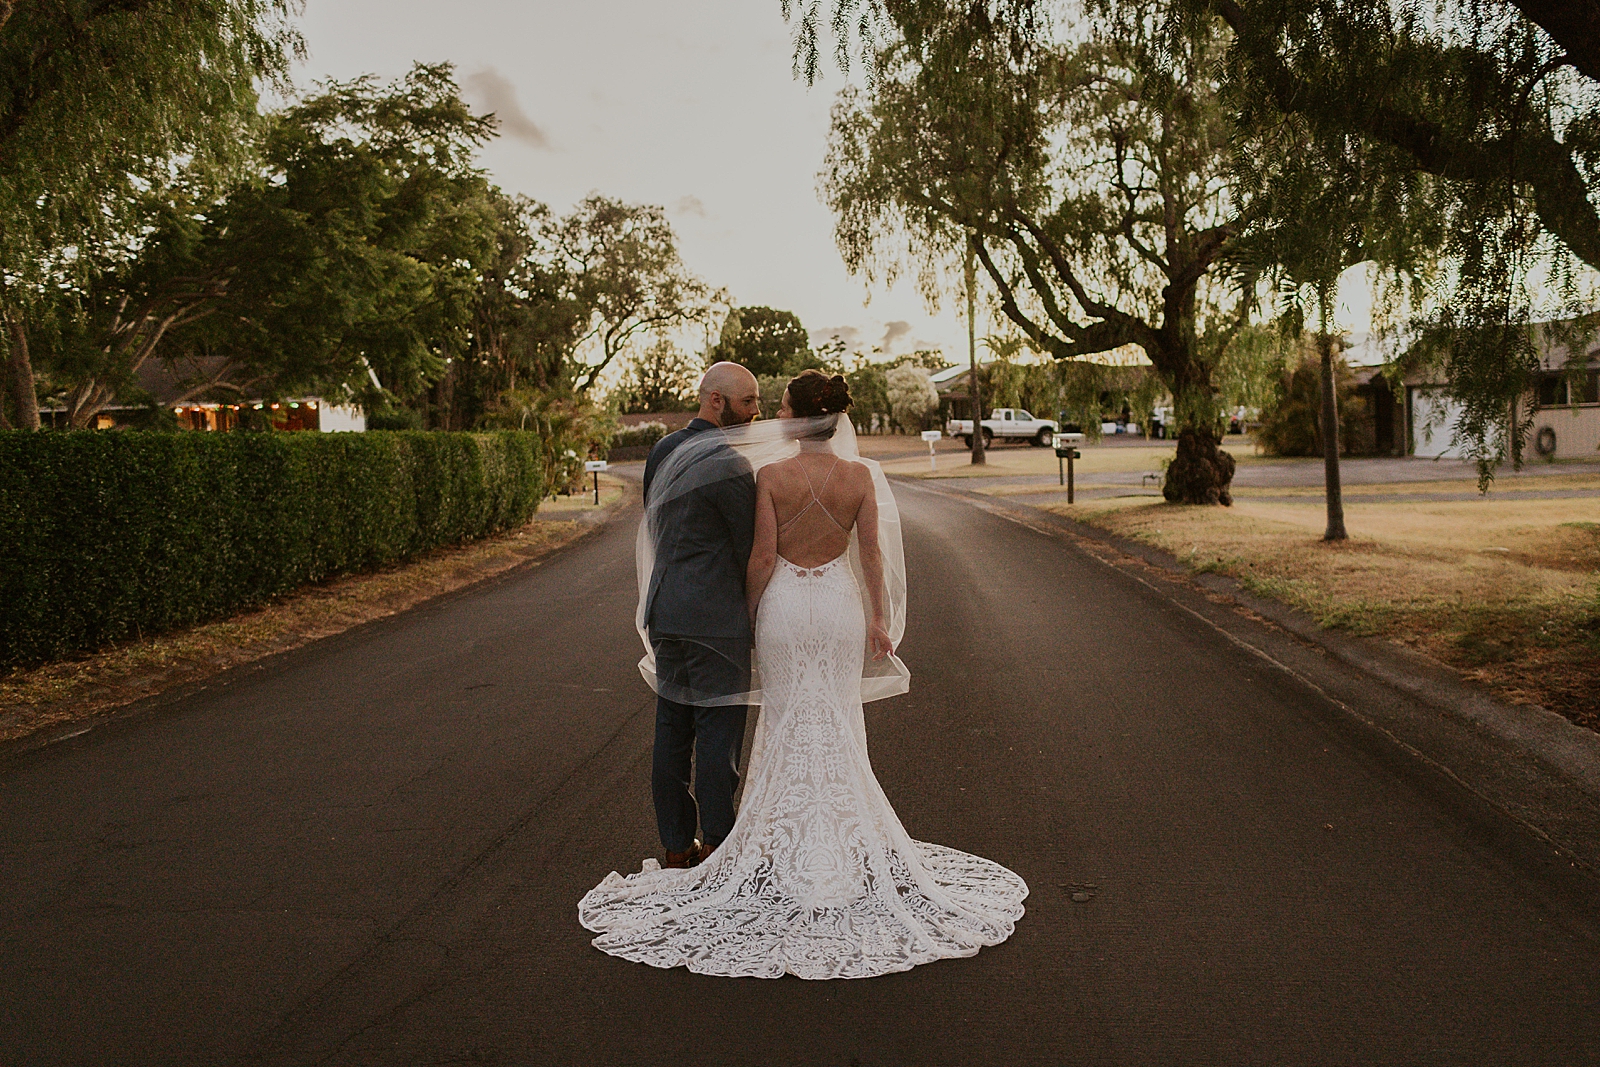 Bride and Groom side by side with veil covering both of them in the middle of the street